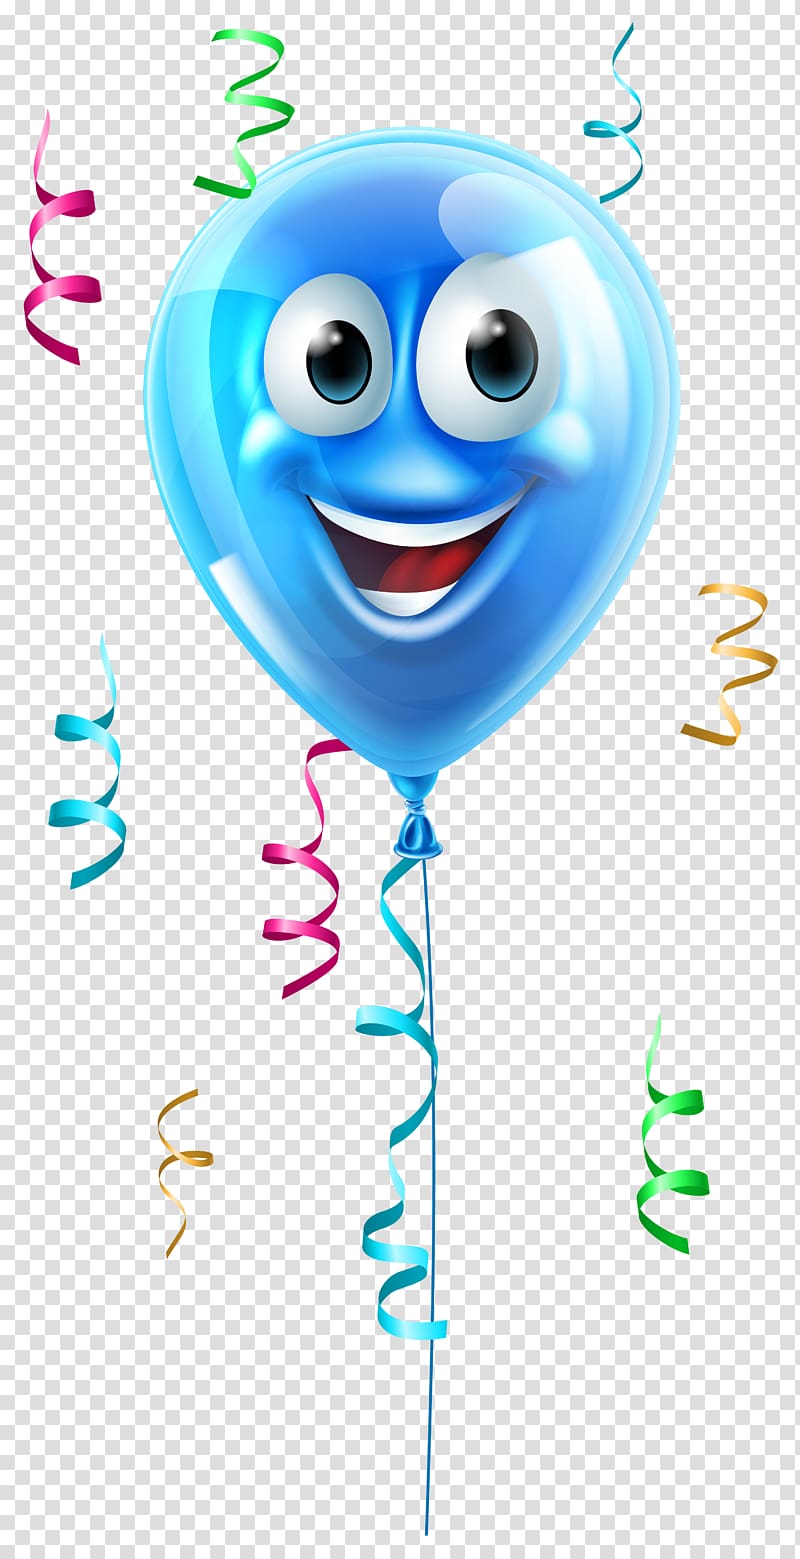 blue balloon illustration, Balloon Face Icon, Balloon with Face transparent background PNG clipart